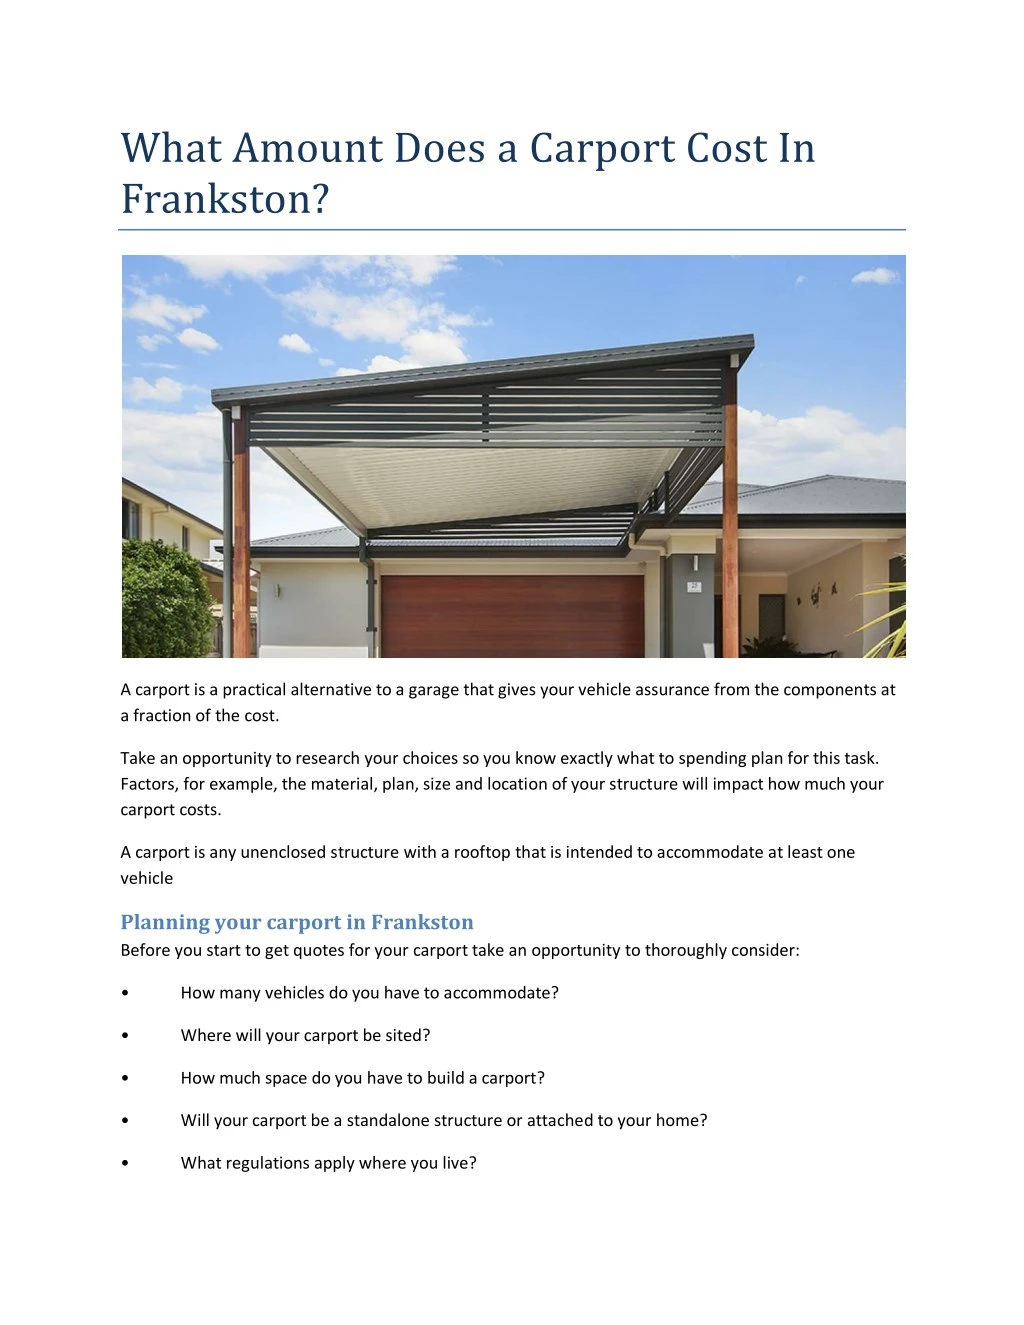 what amount does a carport cost in frankston